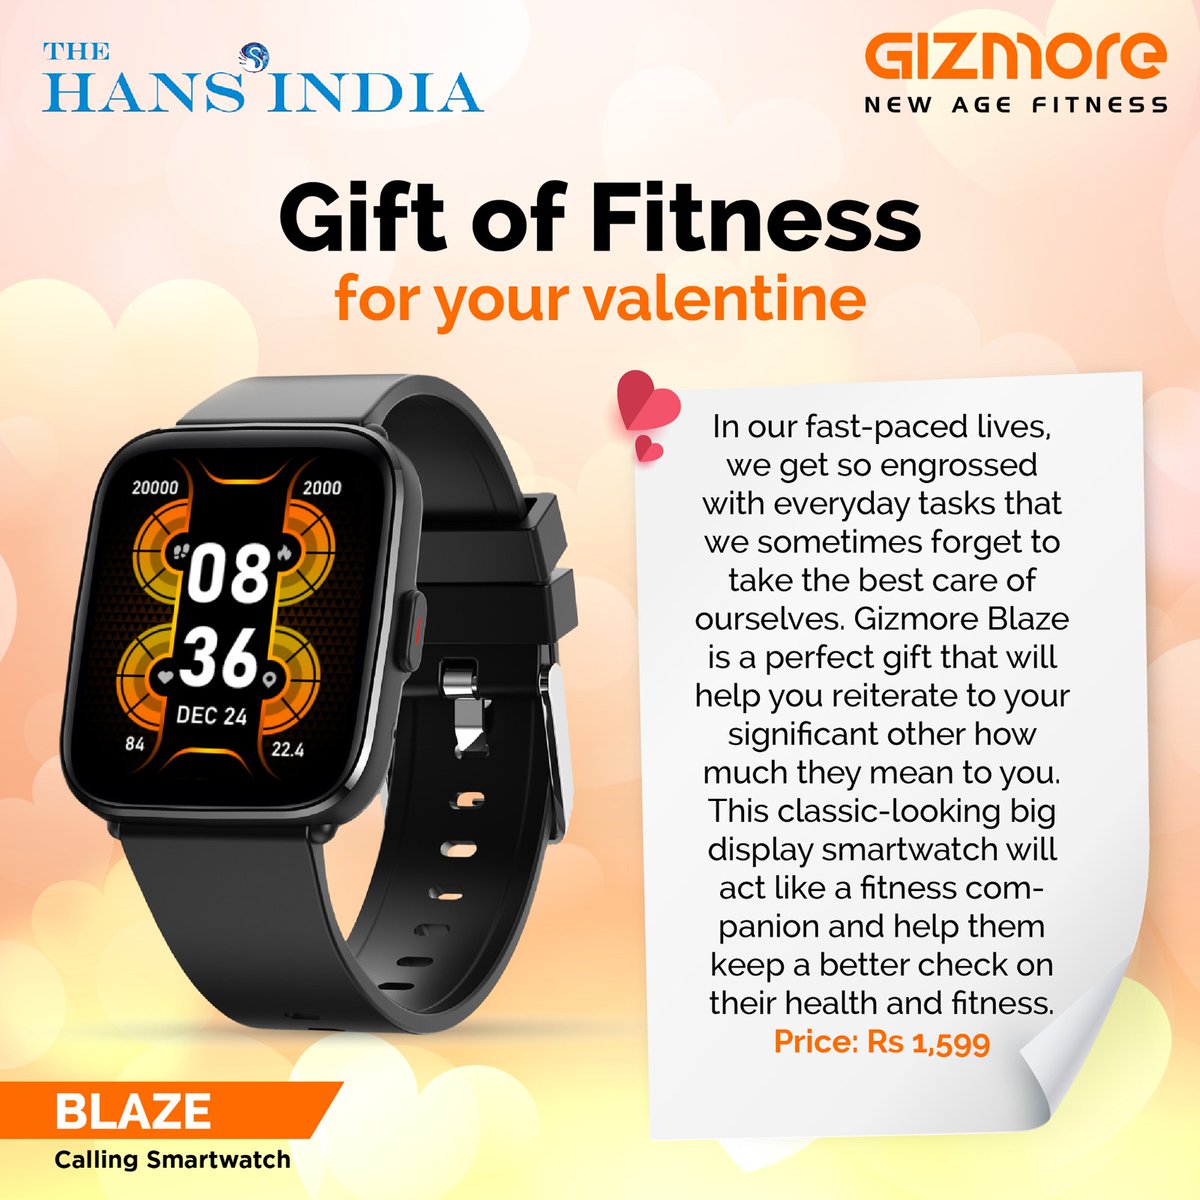 This valentines day, gift #Fitness to your loved ones as #TheHansIndia features #Gizmore #Smartwatch as one of the best #ValentineGifts Reat it here : bit.ly/3jNeSot
Buy now : bit.ly/3TE71GC
#NewAgeFitness #ValentinesDay #GiftIdeas @TheHansIndiaWeb @Flipkart